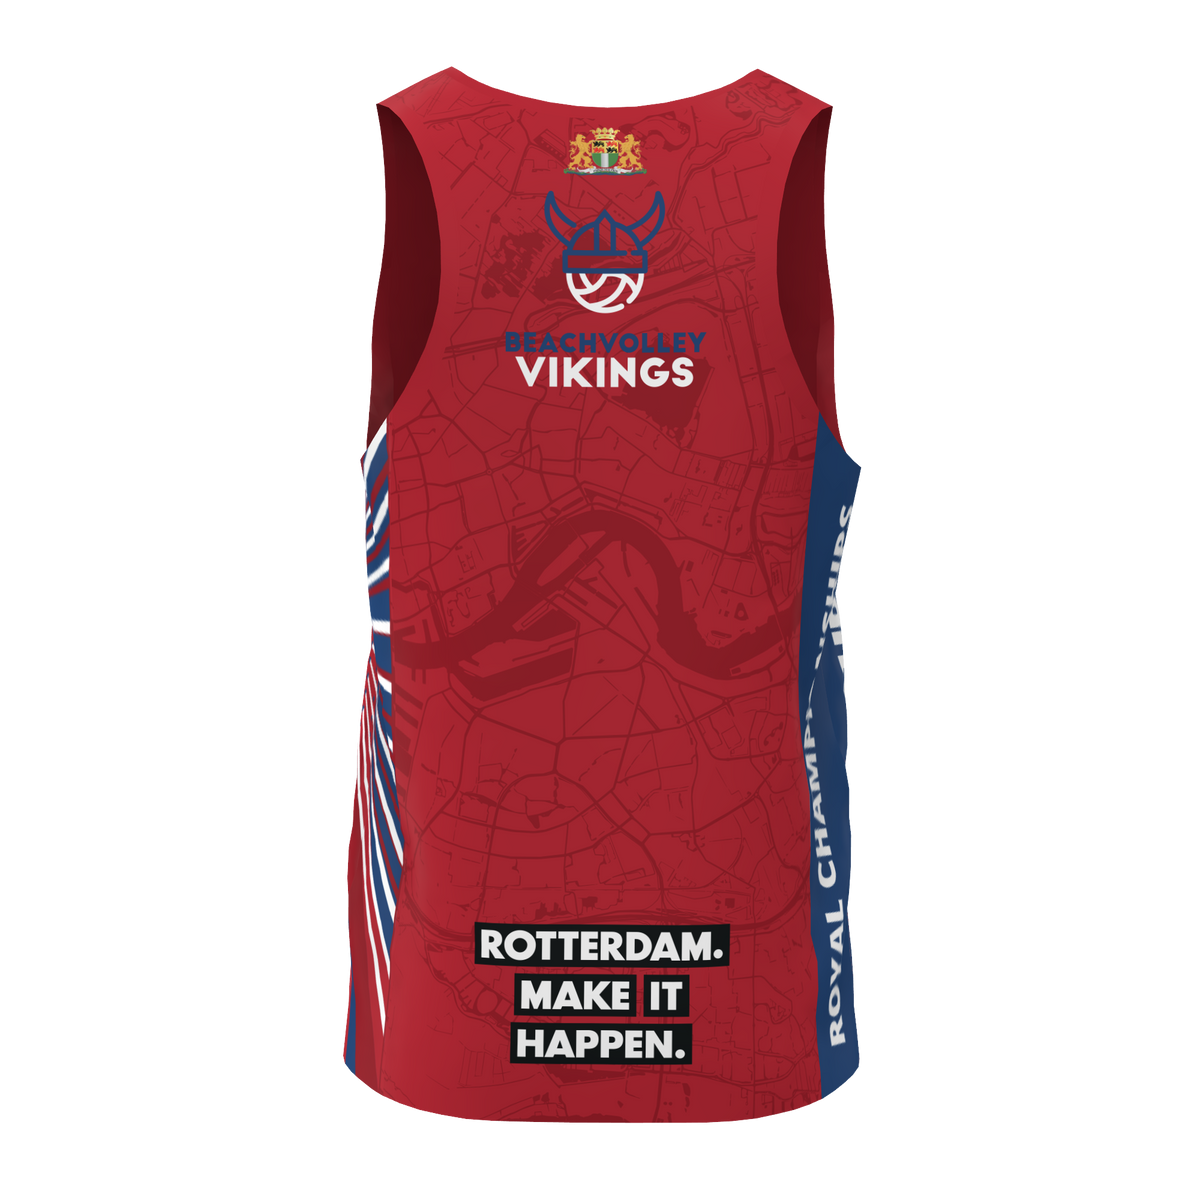 Singlet THE NETHERLANDS - Royal Championships Queen & King of the Cour –  Beachvolley Merch